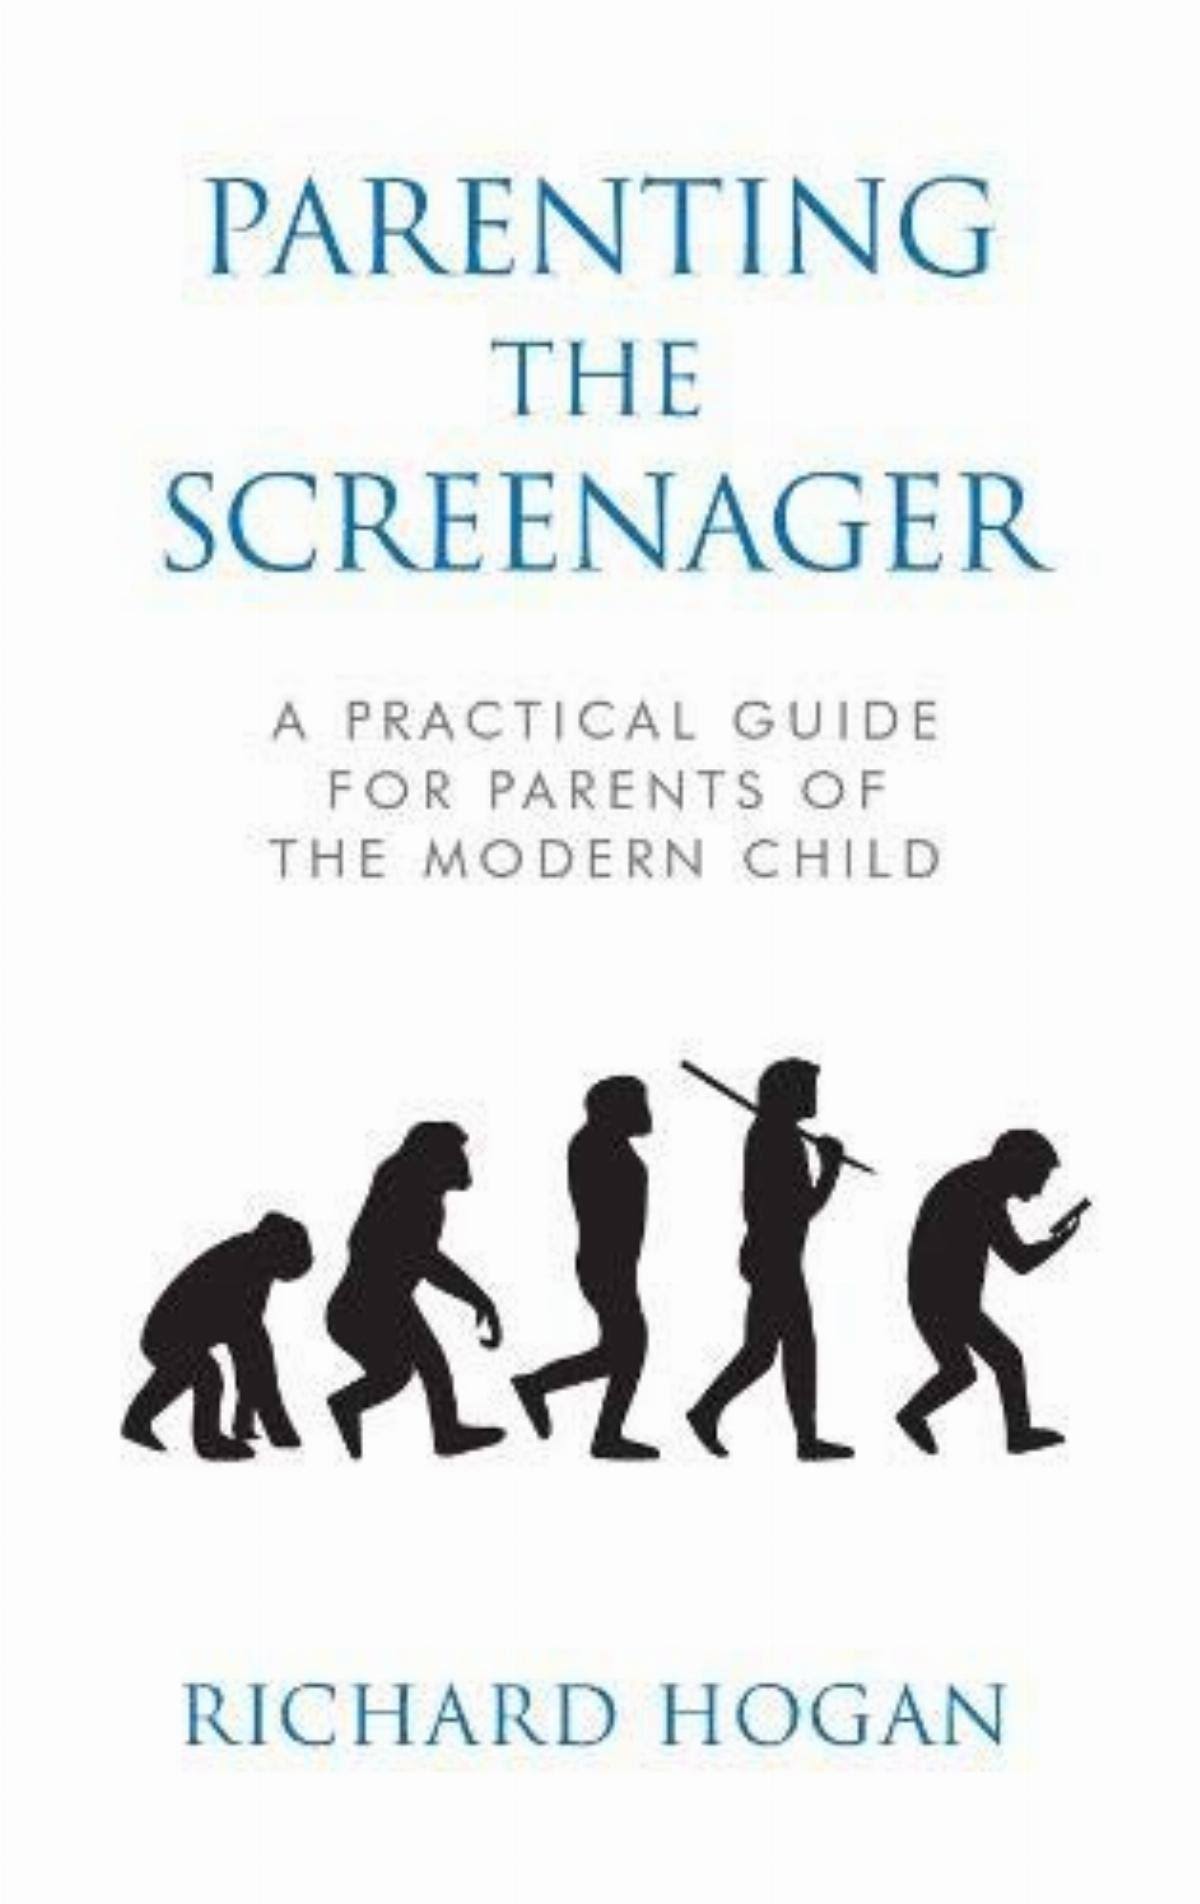 Parenting the Screenager: A Practical Guide for Parents of the Modern Child [Book]